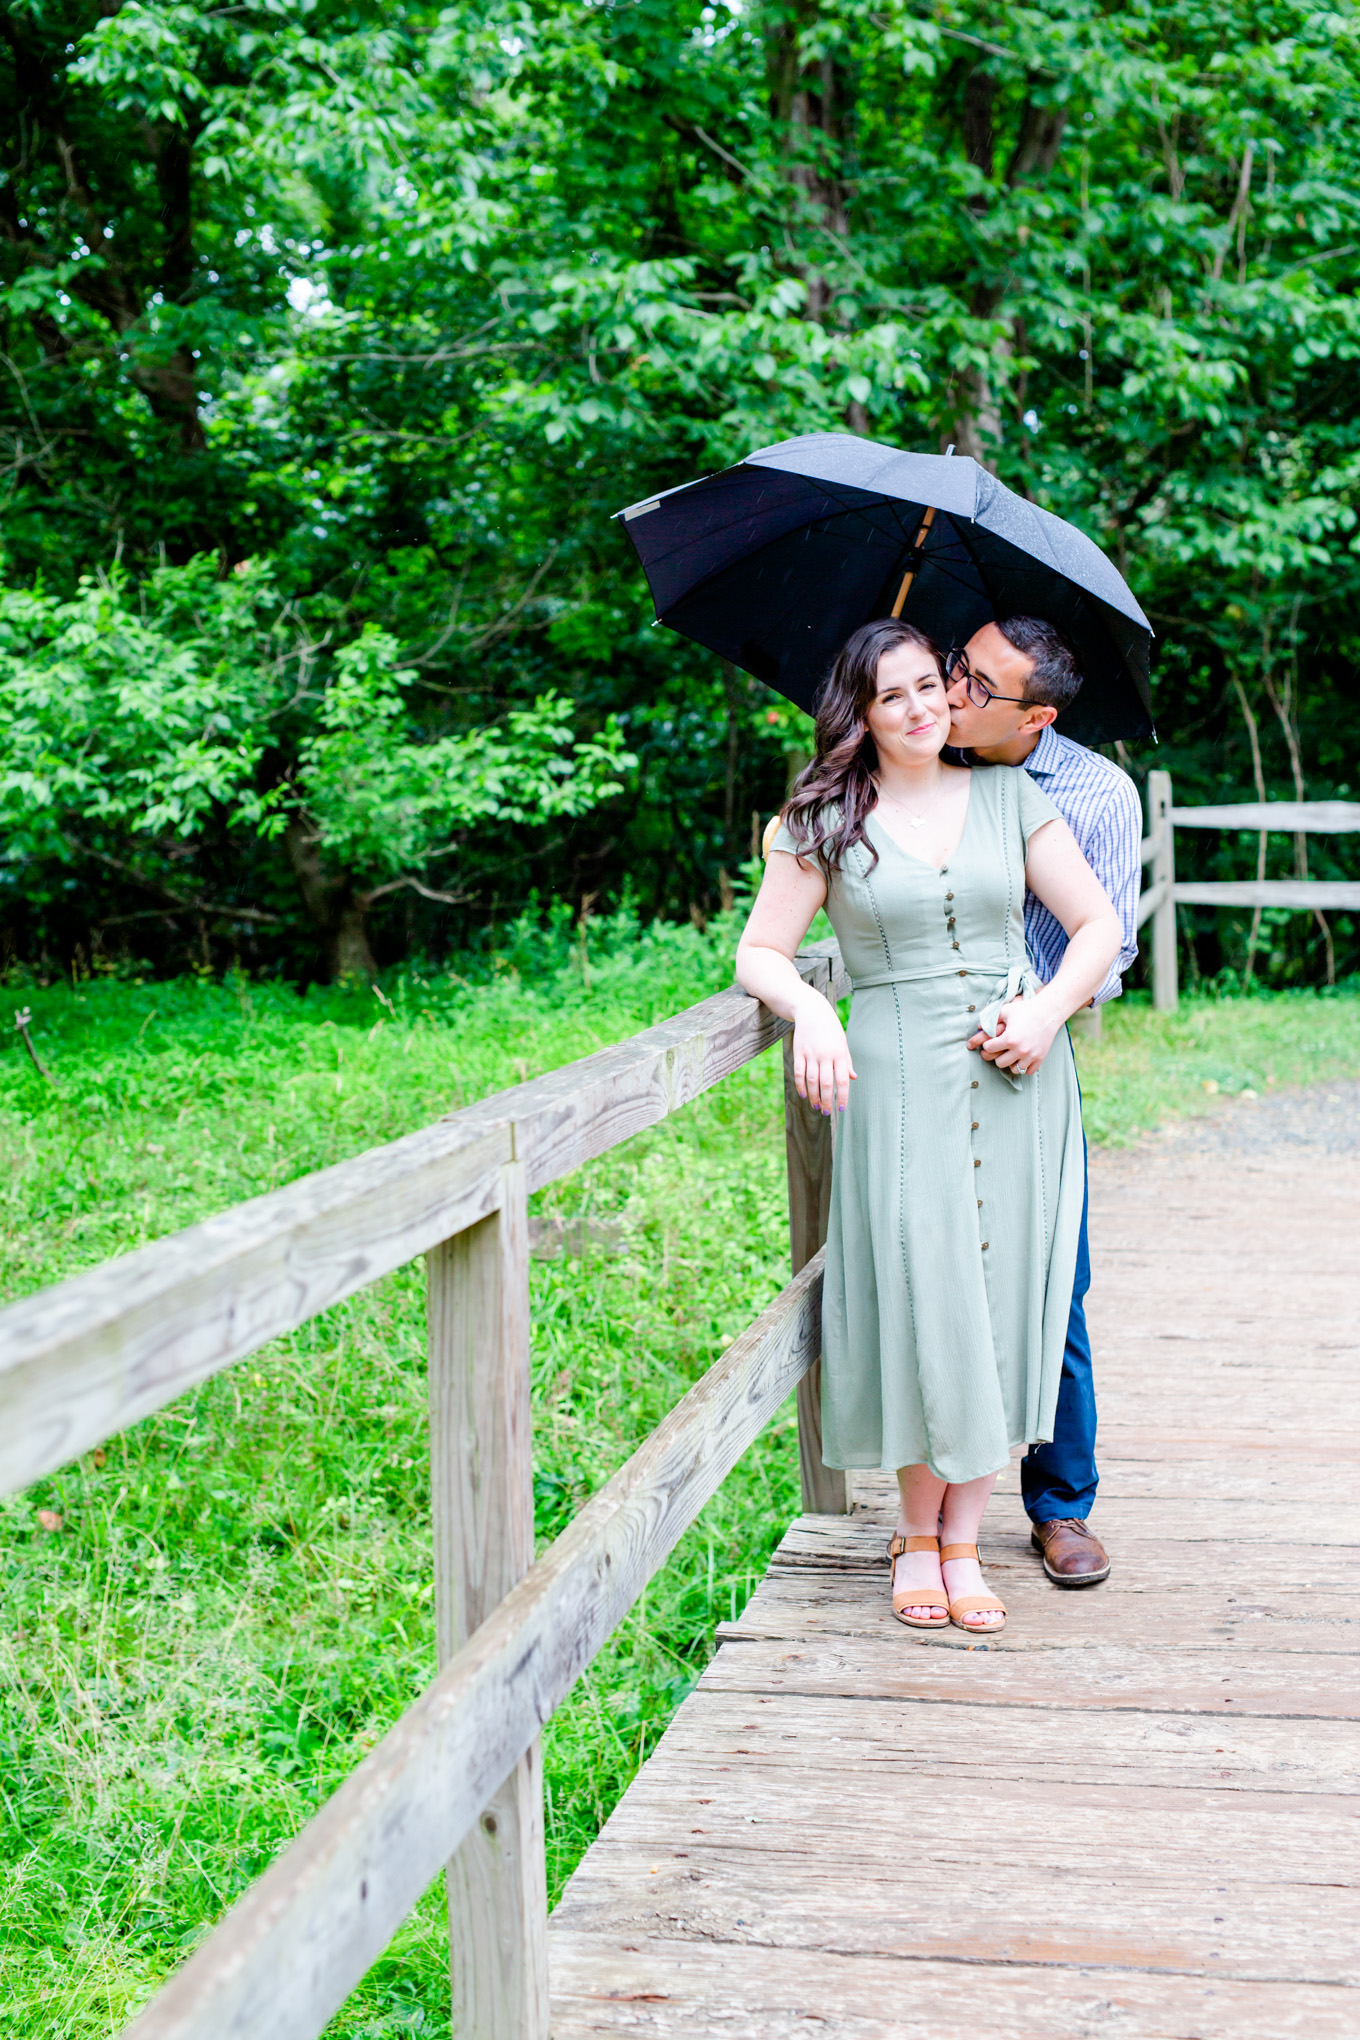 Great Falls Park engagement photos, Great Falls Park, Great Falls Virginia, national park, Great Falls, Great Falls engagement photos, Virginia engagement photos, Virginia engagement photographer, Rachel E.H. Photography, engaged couple, engagement session style, outdoorsy engagement photos, hiking engagement photos, couple standing under umbrella